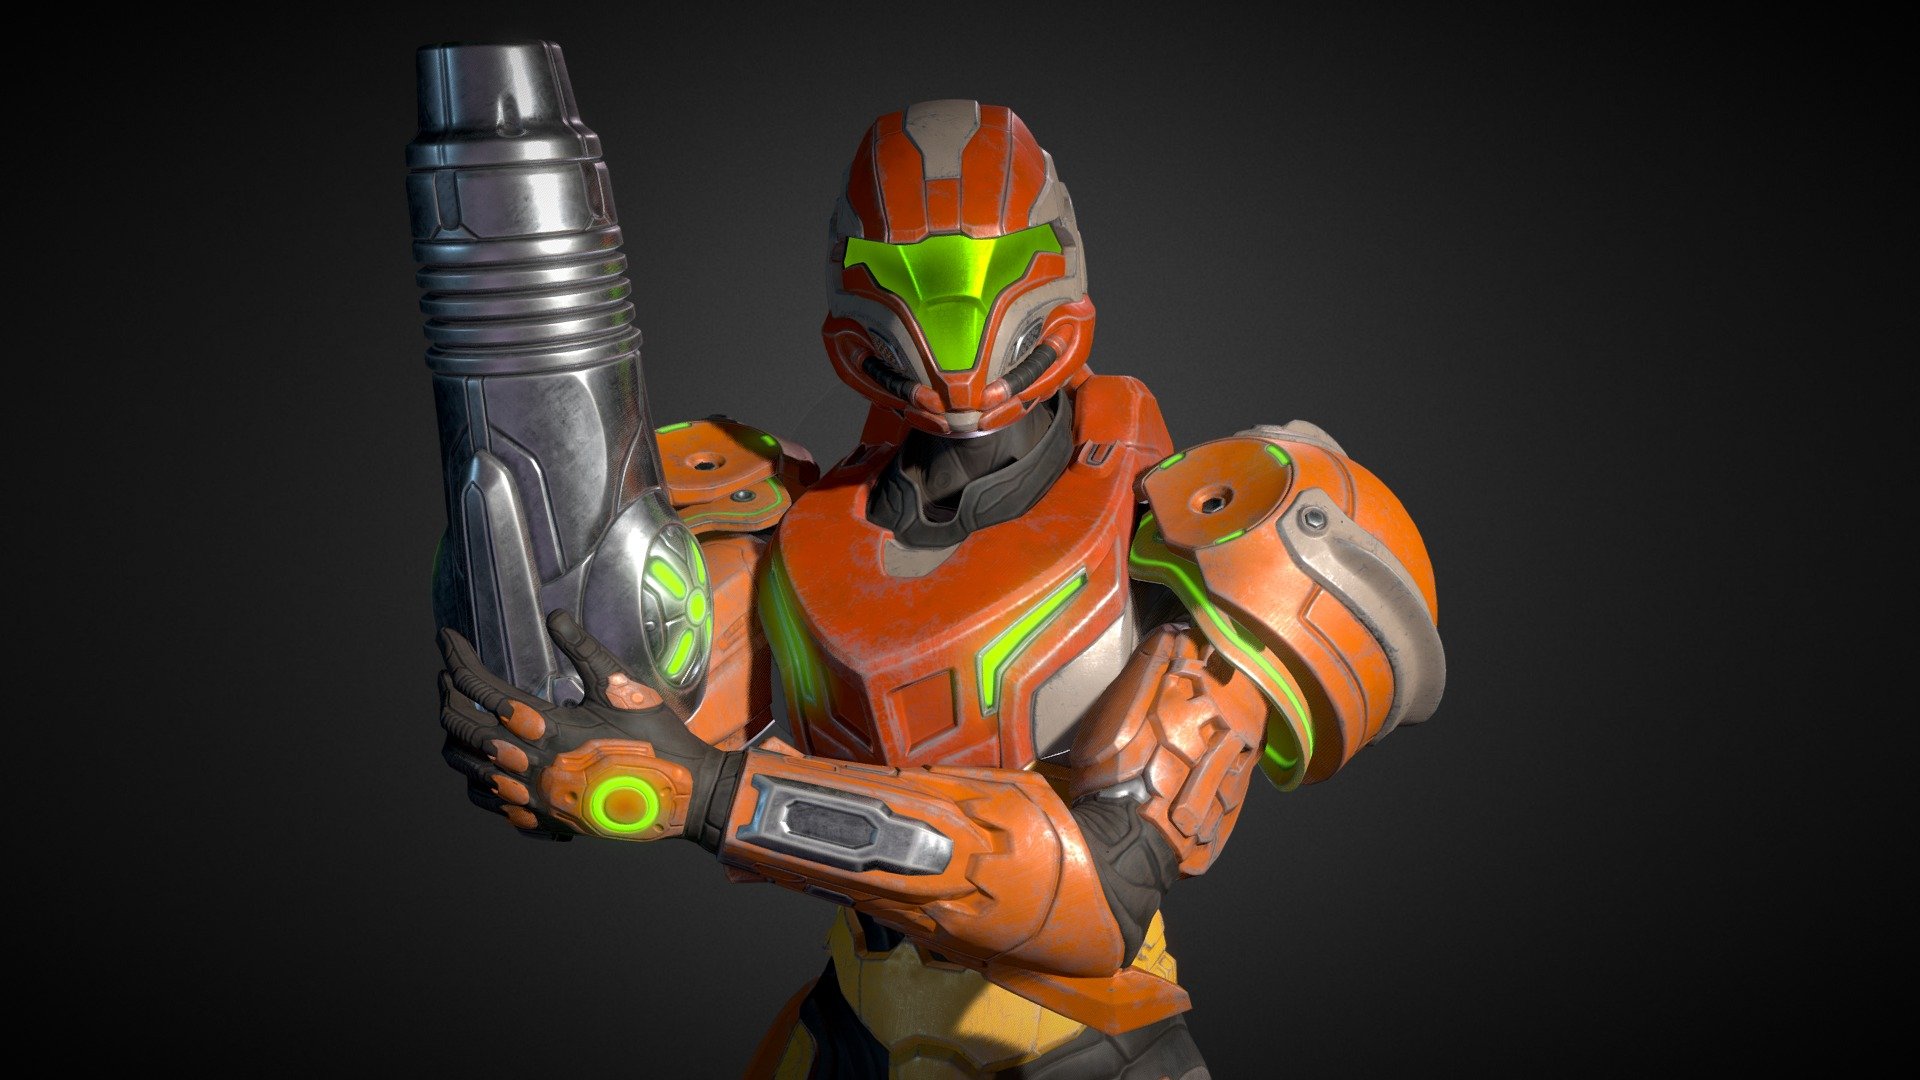 A reimagining of halo spartan armor designed for bounty hunter Samus Aran. After making contact with the UNSC and being inducted into their Spartan program, a new suit of mjolnir power armor was manufactured for Samus Aran, Spartan S435. Paint configuration matching that of her original varia armor 3d model